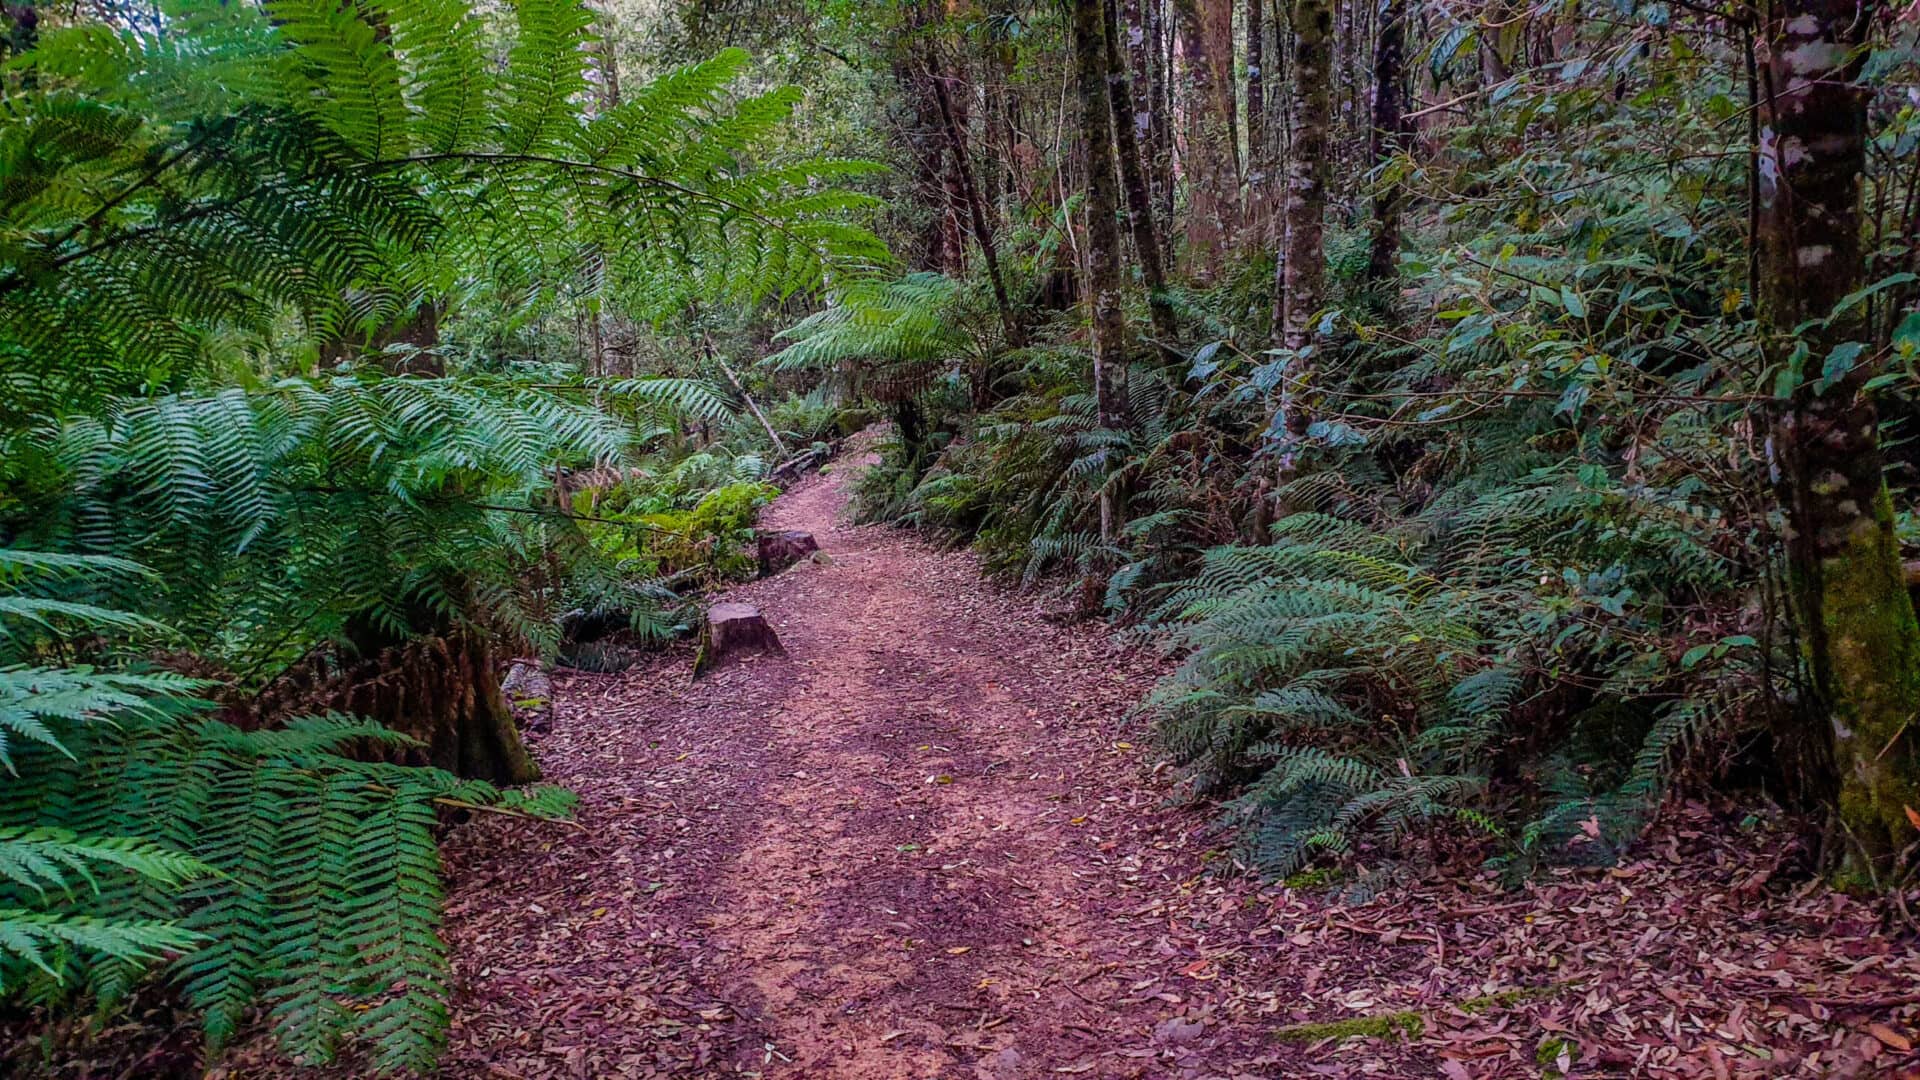 The path leading to Liffey falls- along the way you will see many ferns leading the path and tall trees